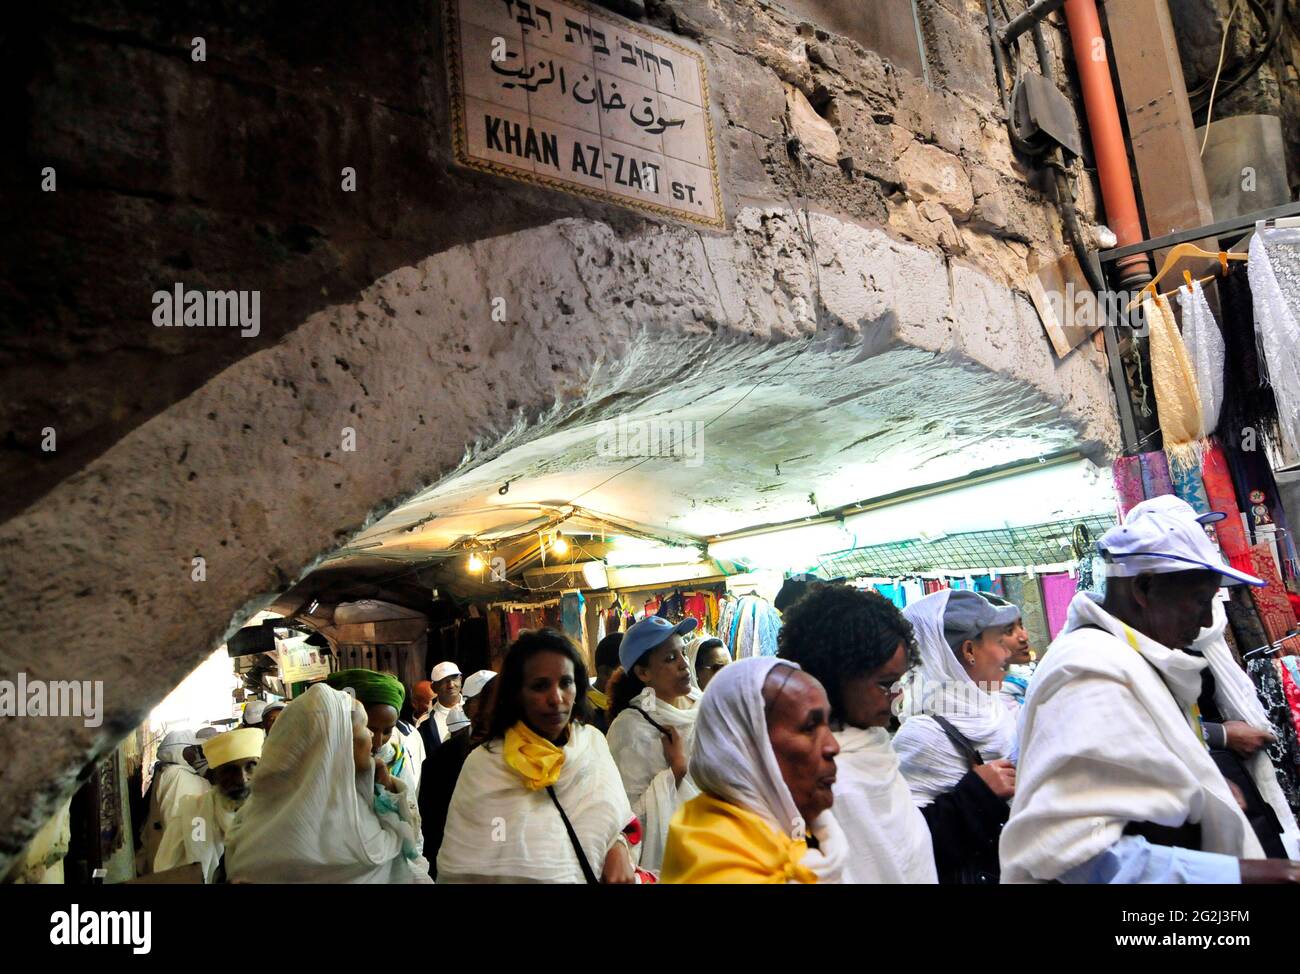 Christian pilgrims walking on the Via Dolorosa at the Khan El Zeit st. in the old city of Jerusalem. Stock Photo